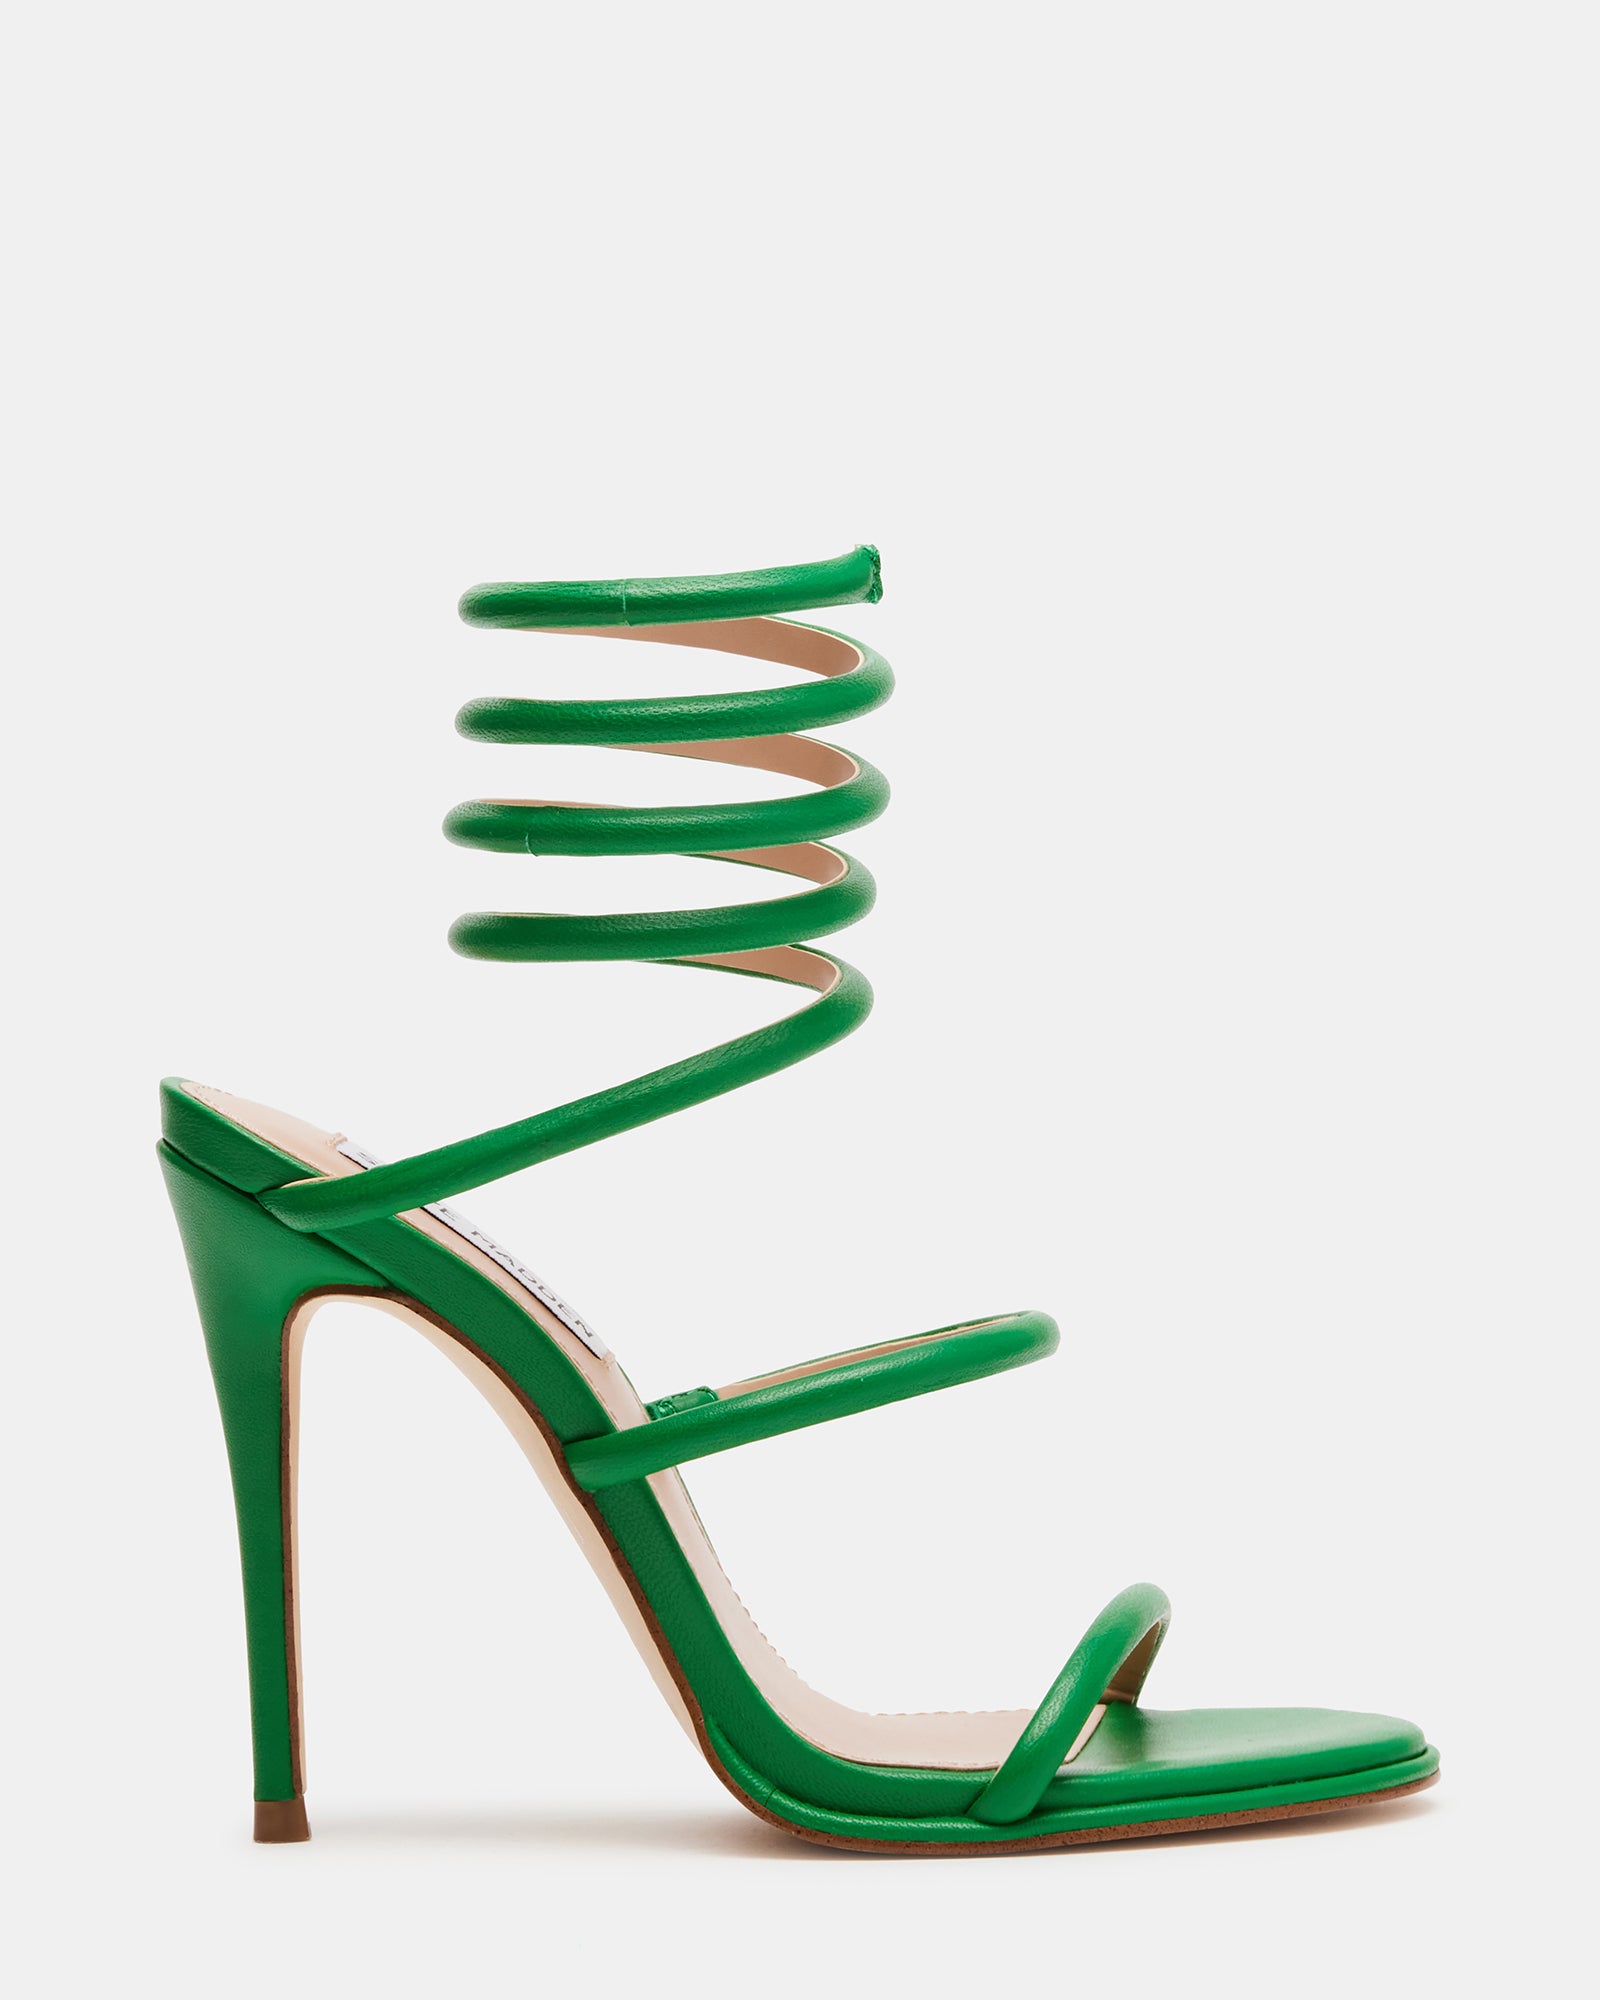 Women's Peep Toe High Heel Sandals Green Square Toe Stiletto Heels  Transparent Strappy Slipper Party Shoes, Fashionable Comfortable And Sexy  for Sale Australia| New Collection Online| SHEIN Australia